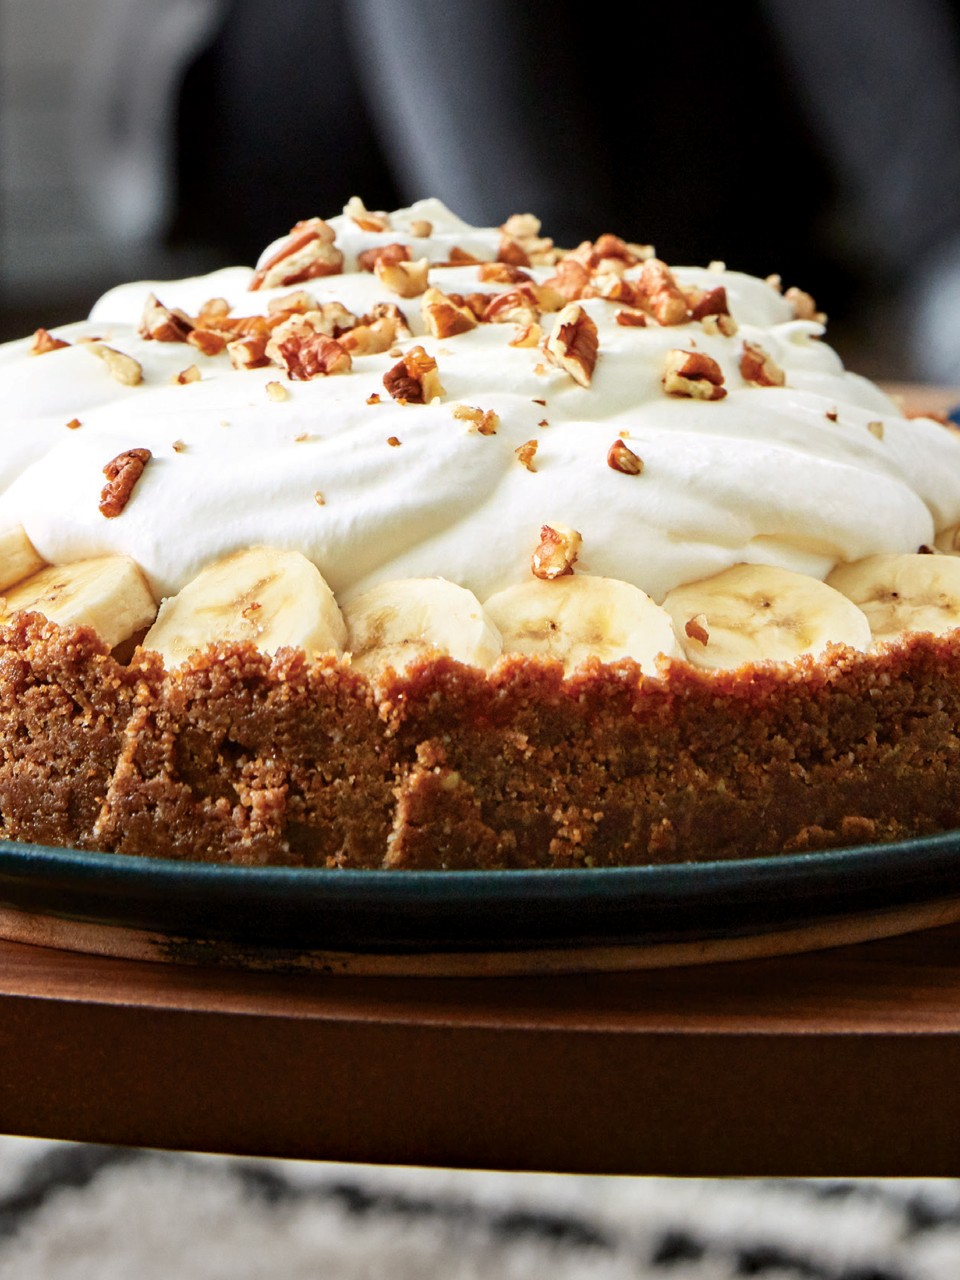 Banana & Toffee Pie with Pecan Crust